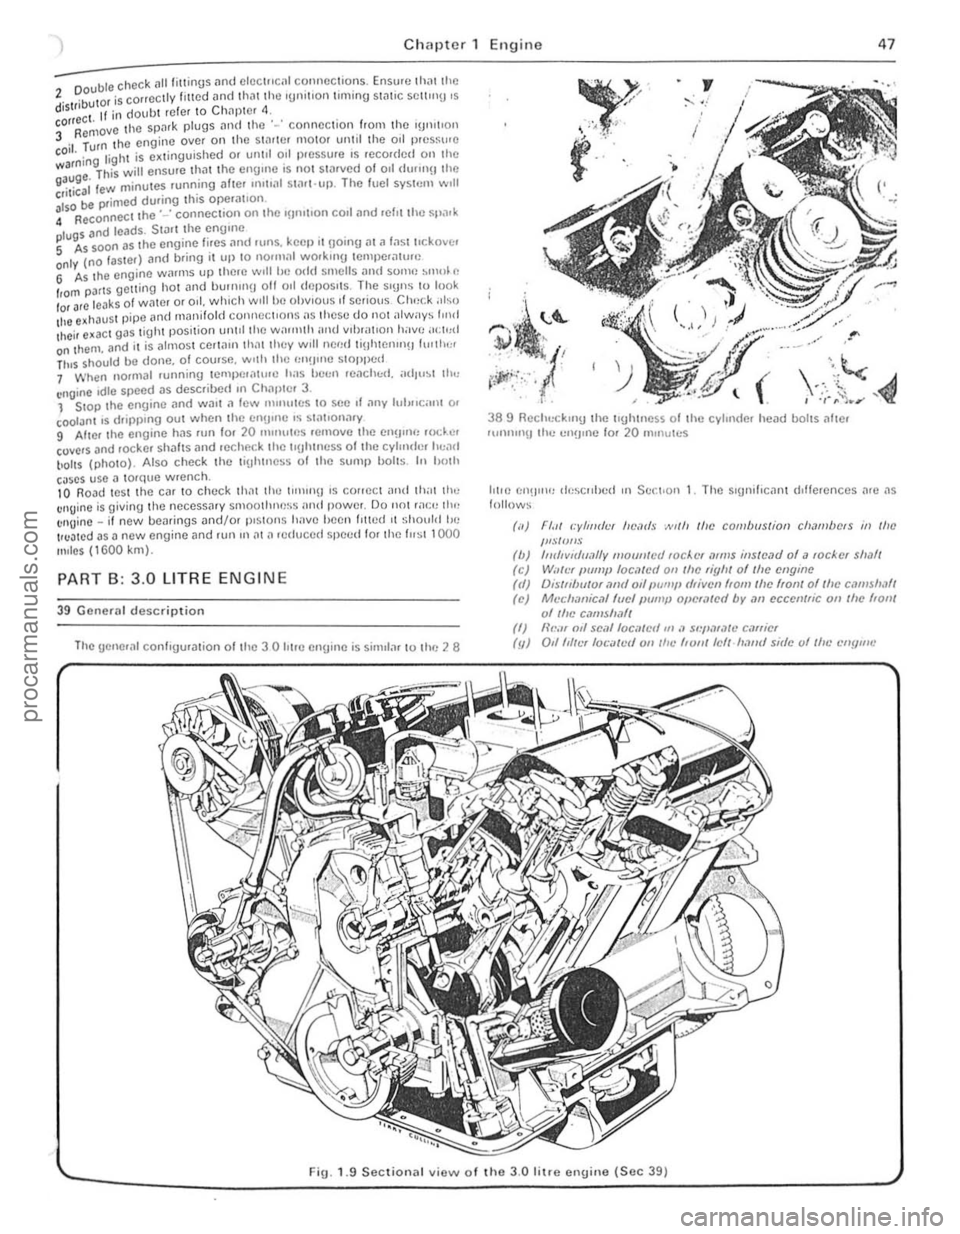 FORD CAPRI 1974 Service Manual Chapter 1 Engin e 47 
--;; ble chec k ~II littings nnd elcct"cill connections. Ensu,e  thnt the 2 .,",or is correctly lilted ilnd Ihil t Ihe IUnil,on tlmmg StJtlC  Selllll\) s distrlU 
I CI  , t II i